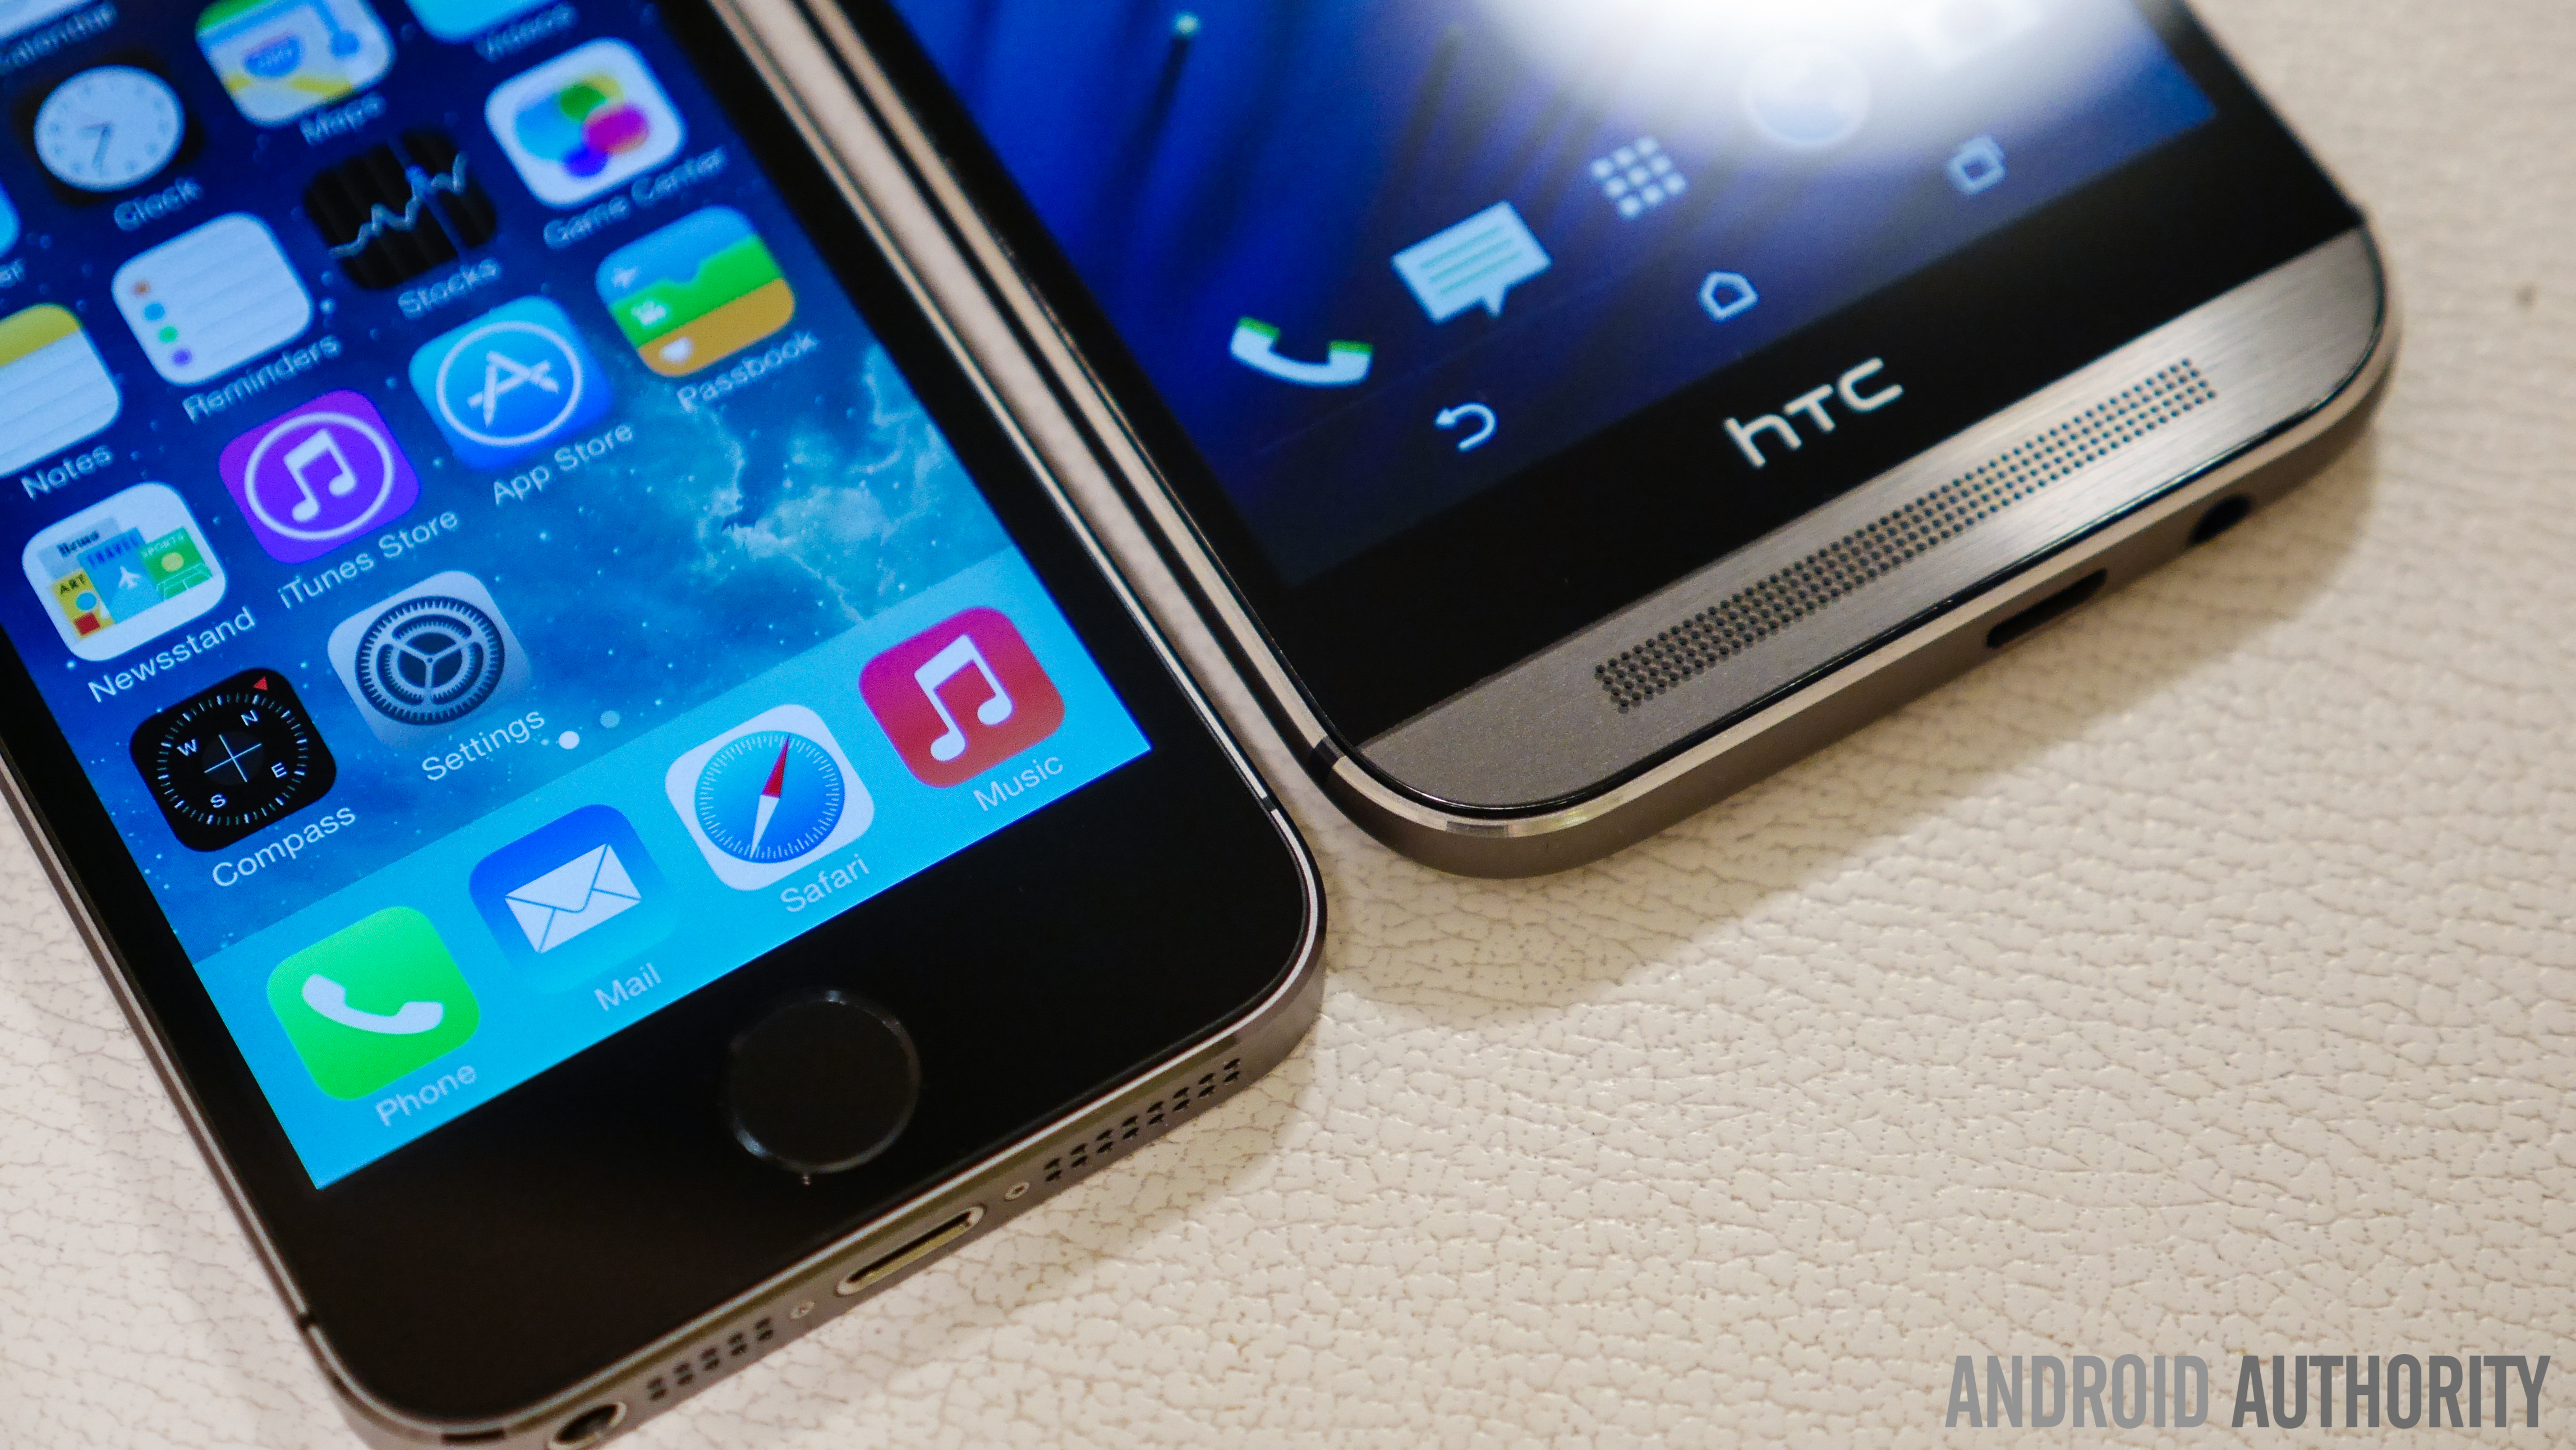 htc one m8 vs iphone 5s quick look aa (3 of 15)